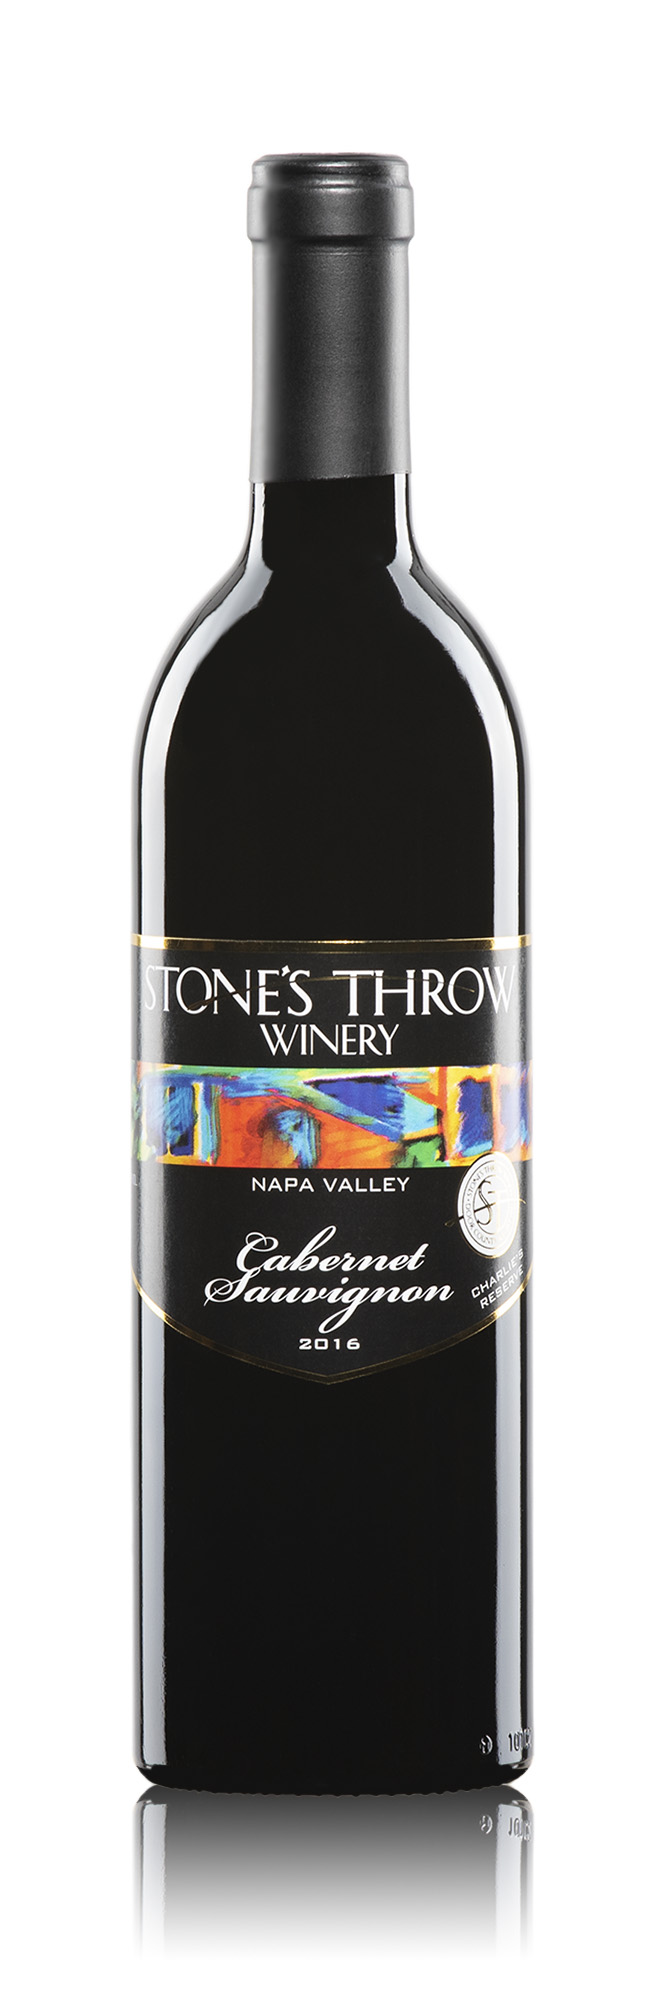 Product Image for Cabernet Sauvignon, St. Helena, Napa Valley, Charlie's Reserve 2020